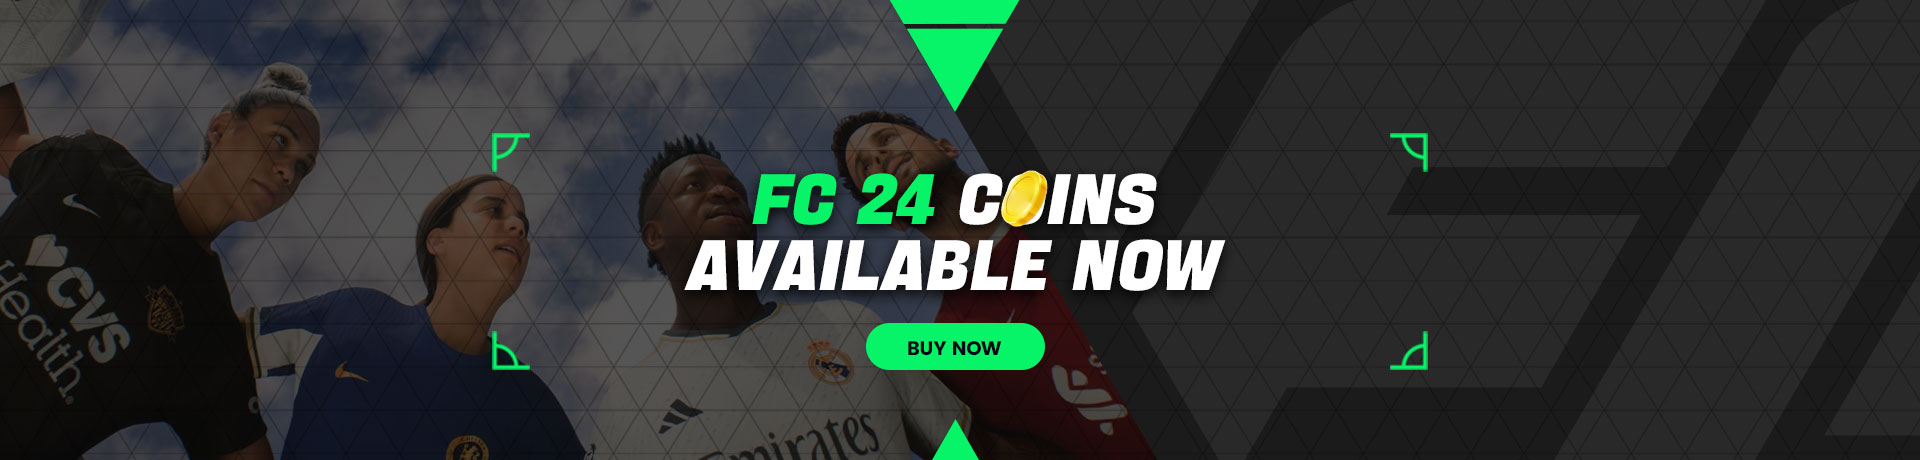 fc 24 available